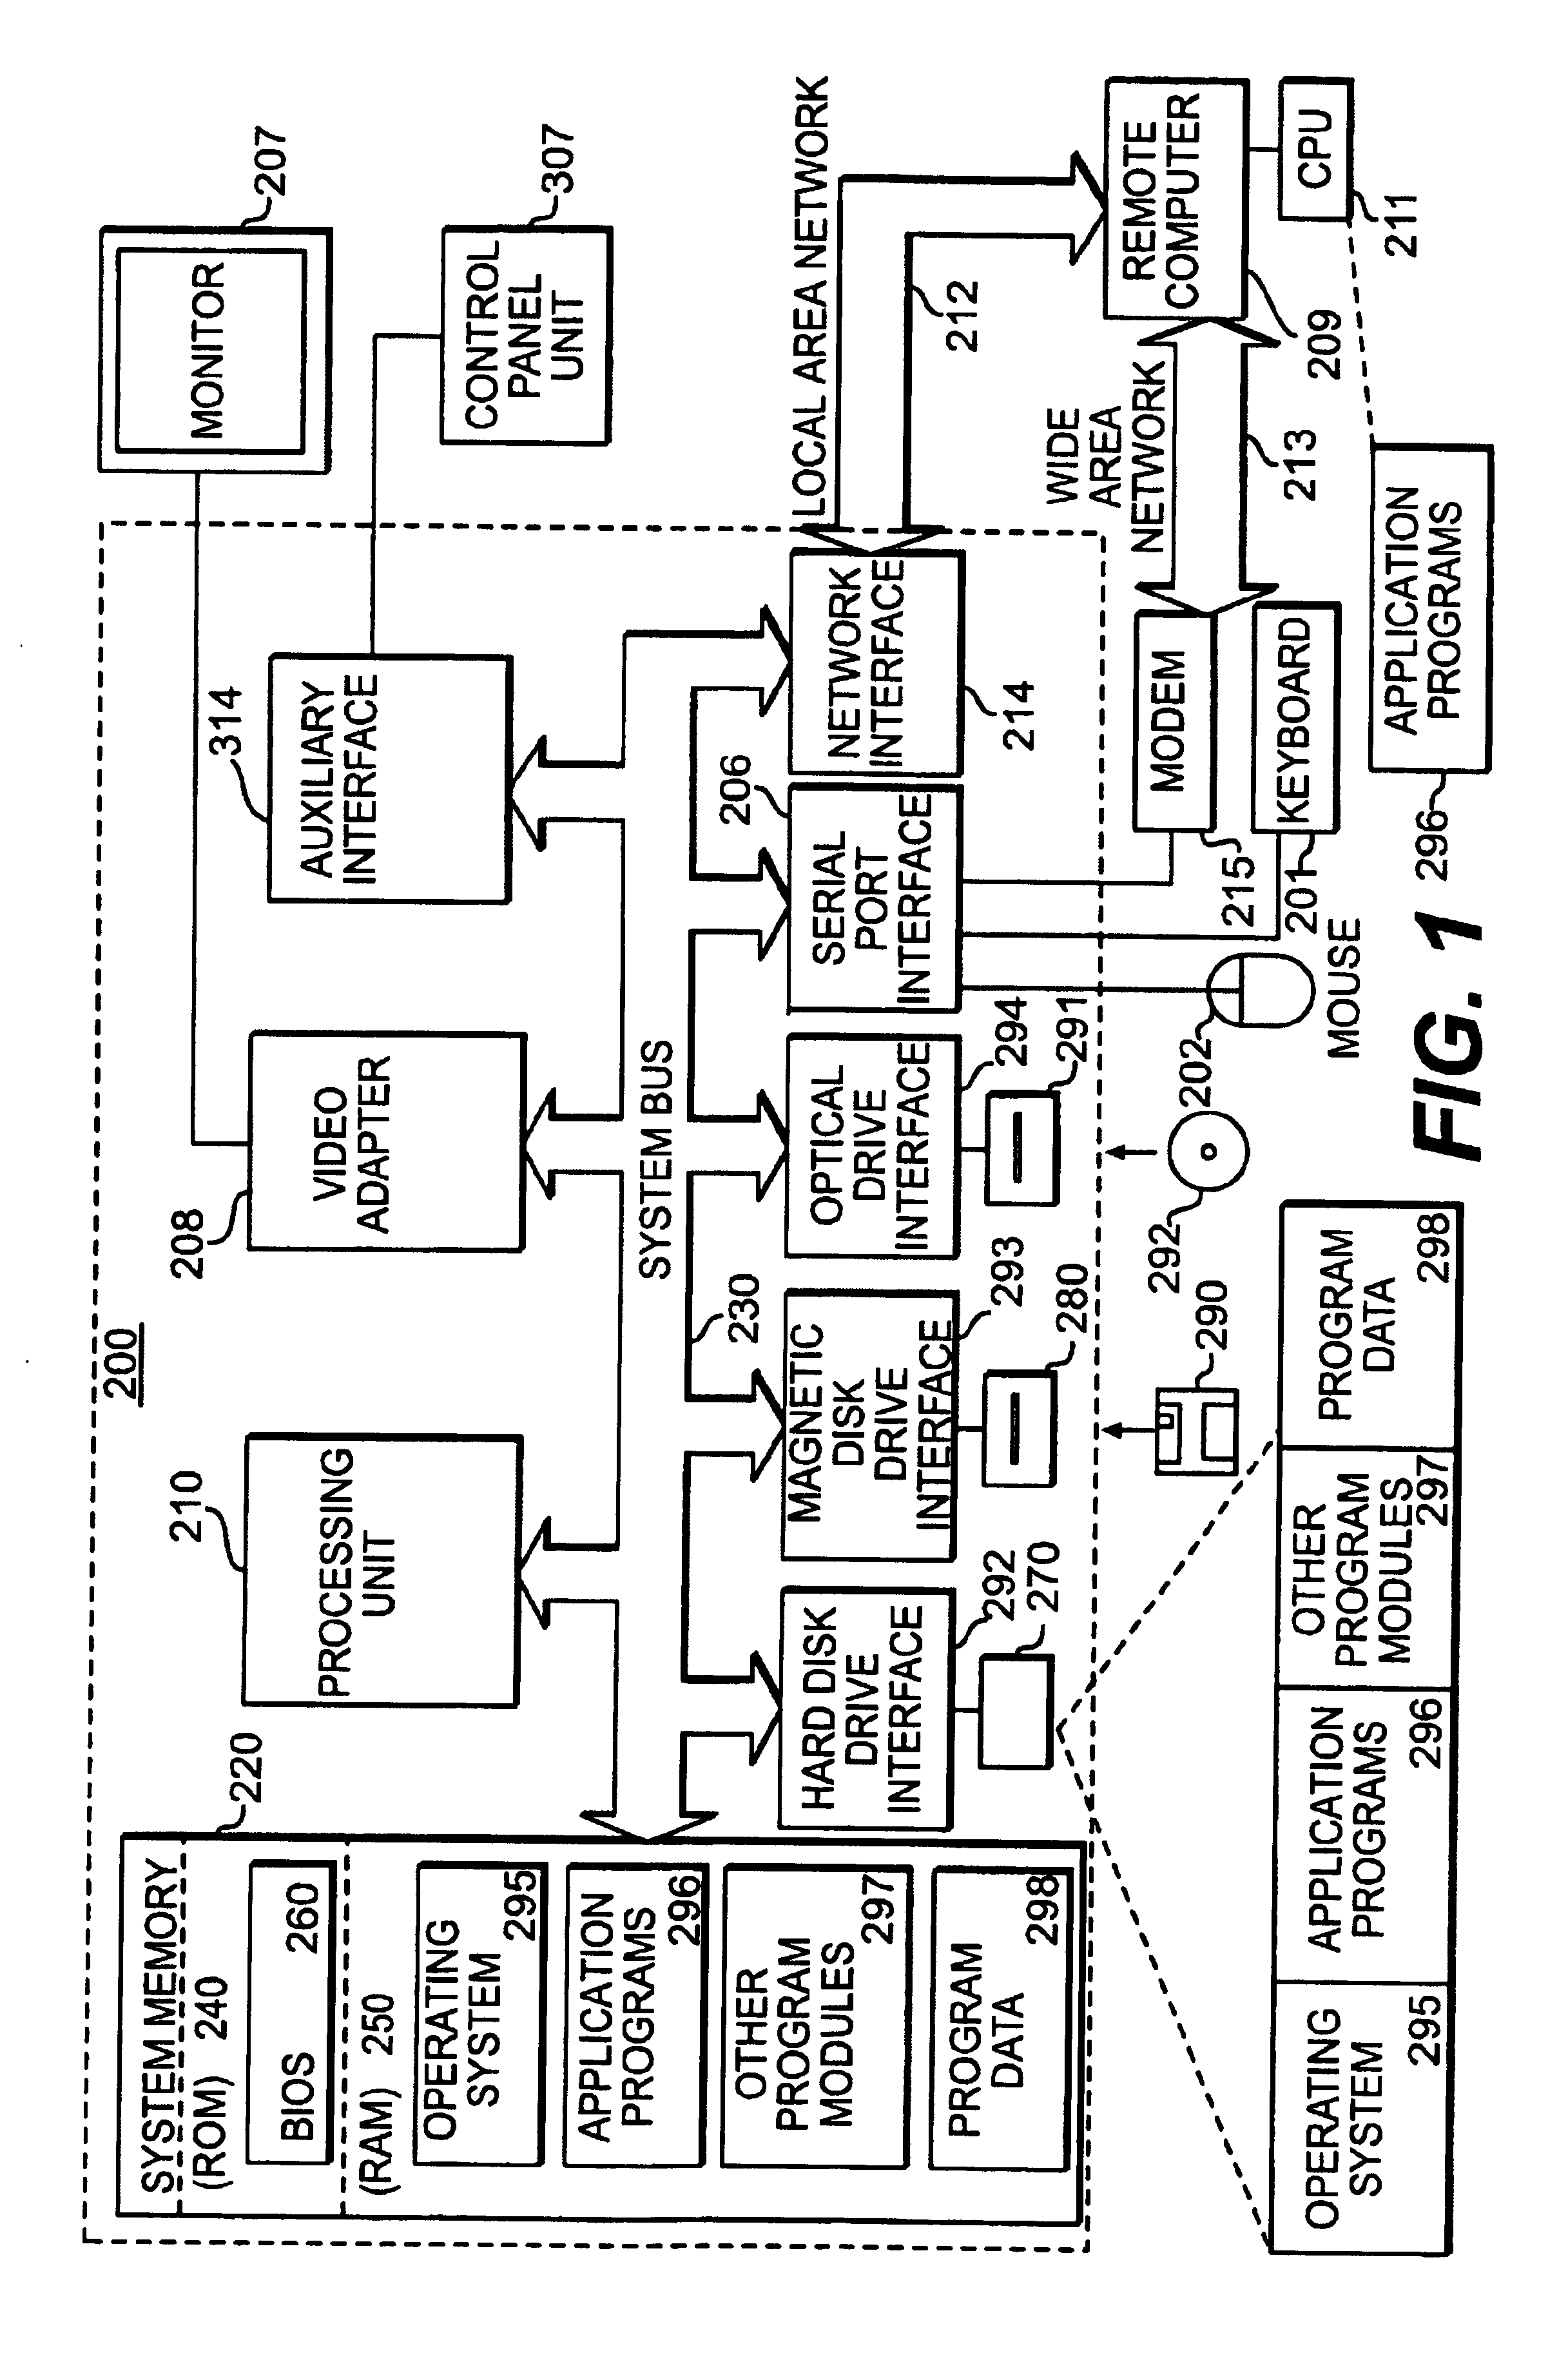 Context sensitive labels for an electronic device